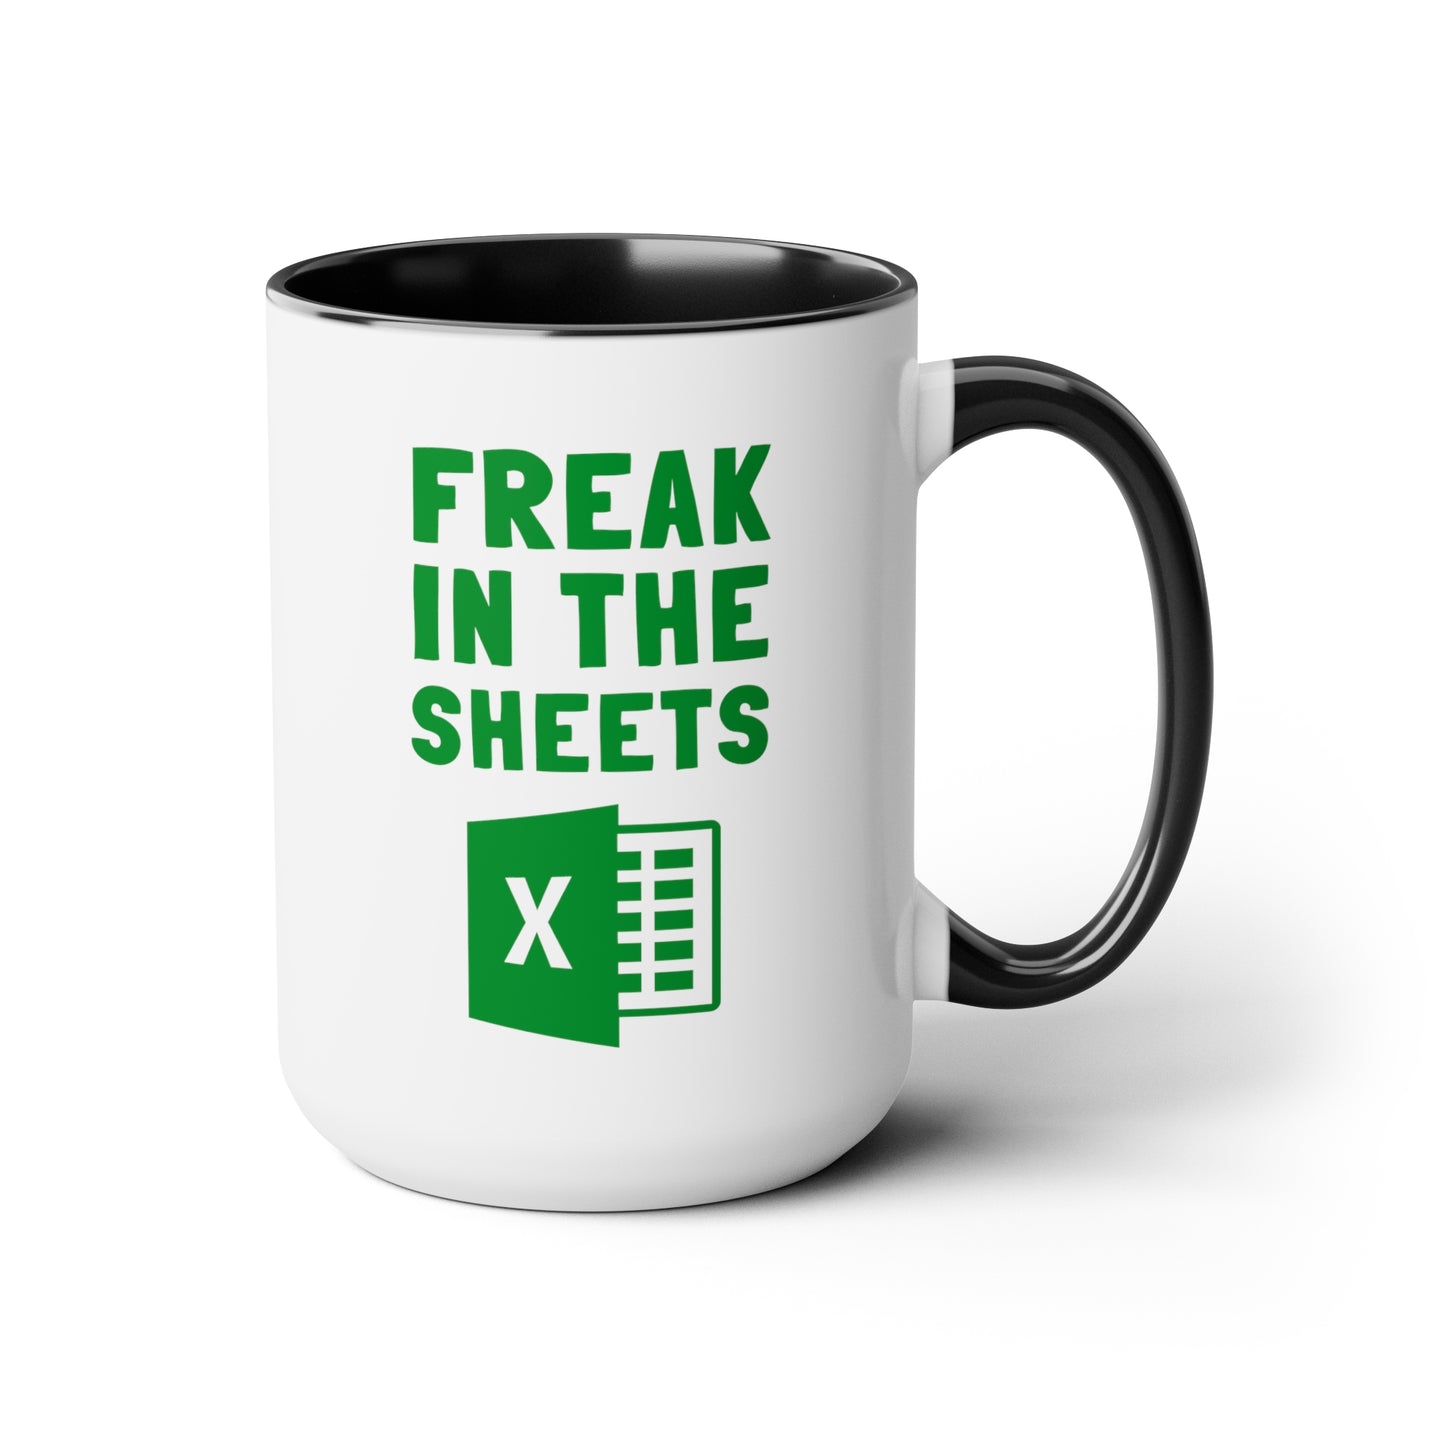 Freak In The Sheets 15oz white with black accent funny large coffee mug gift for accountant excel spreadsheet tax office humor waveywares wavey wares wavywares wavy wares